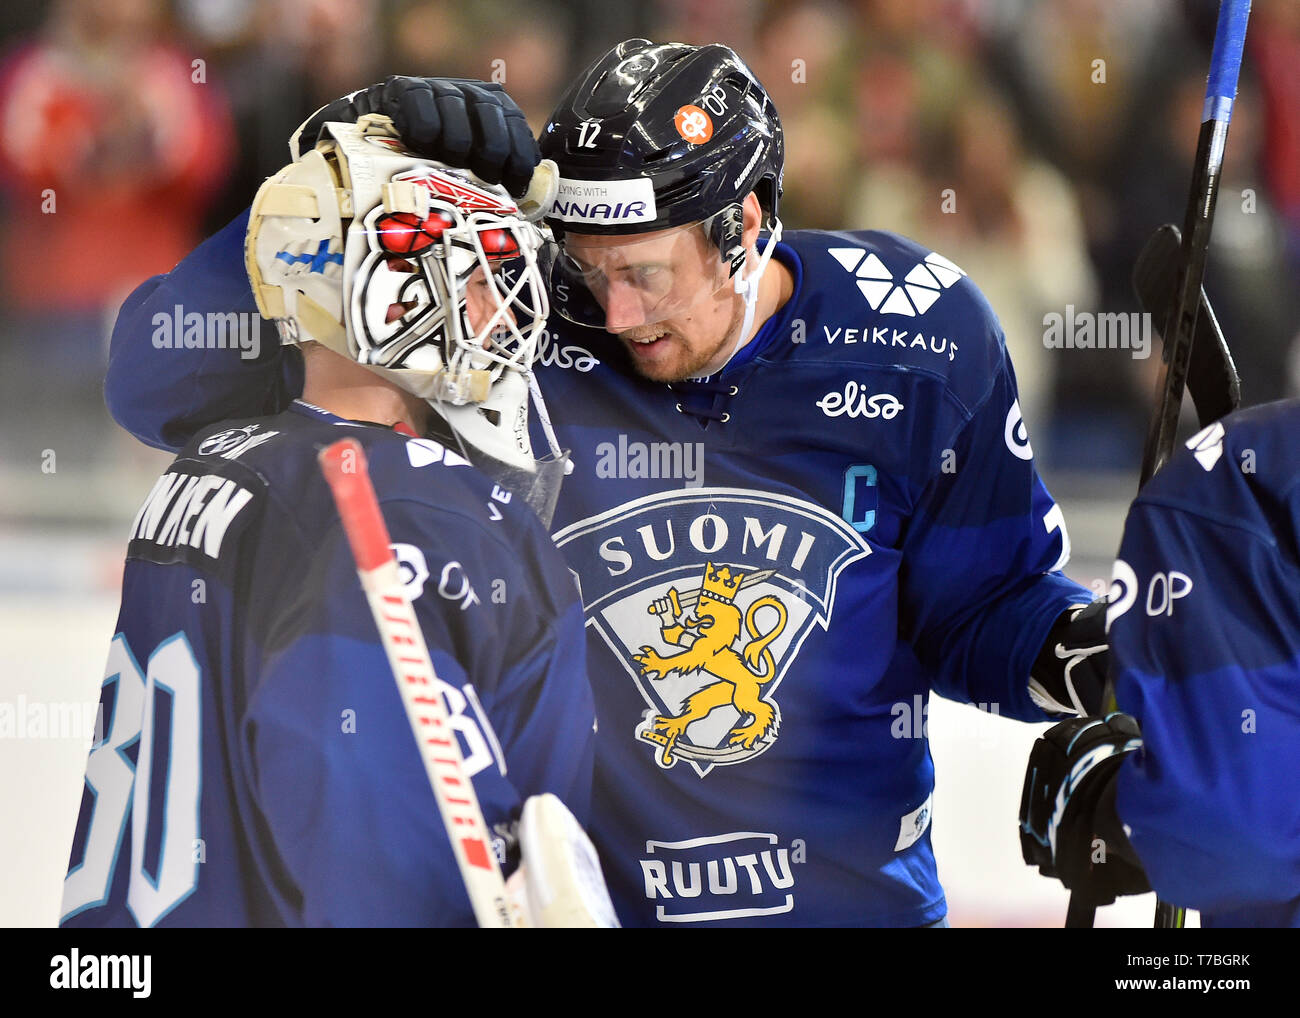 Brno, Czech Republic. 04th May, 2019. L-R Goalkeeper Kevin Lankinen receives congratulations from captain Marko Anttila (both FIN) during the Russia vs Finland match within Carlson Hockey Games tournament, part of Euro Hockey Tour in Brno, Czech Republic, May 4, 2019. Credit: Lubos Pavlicek/CTK Photo/Alamy Live News Stock Photo